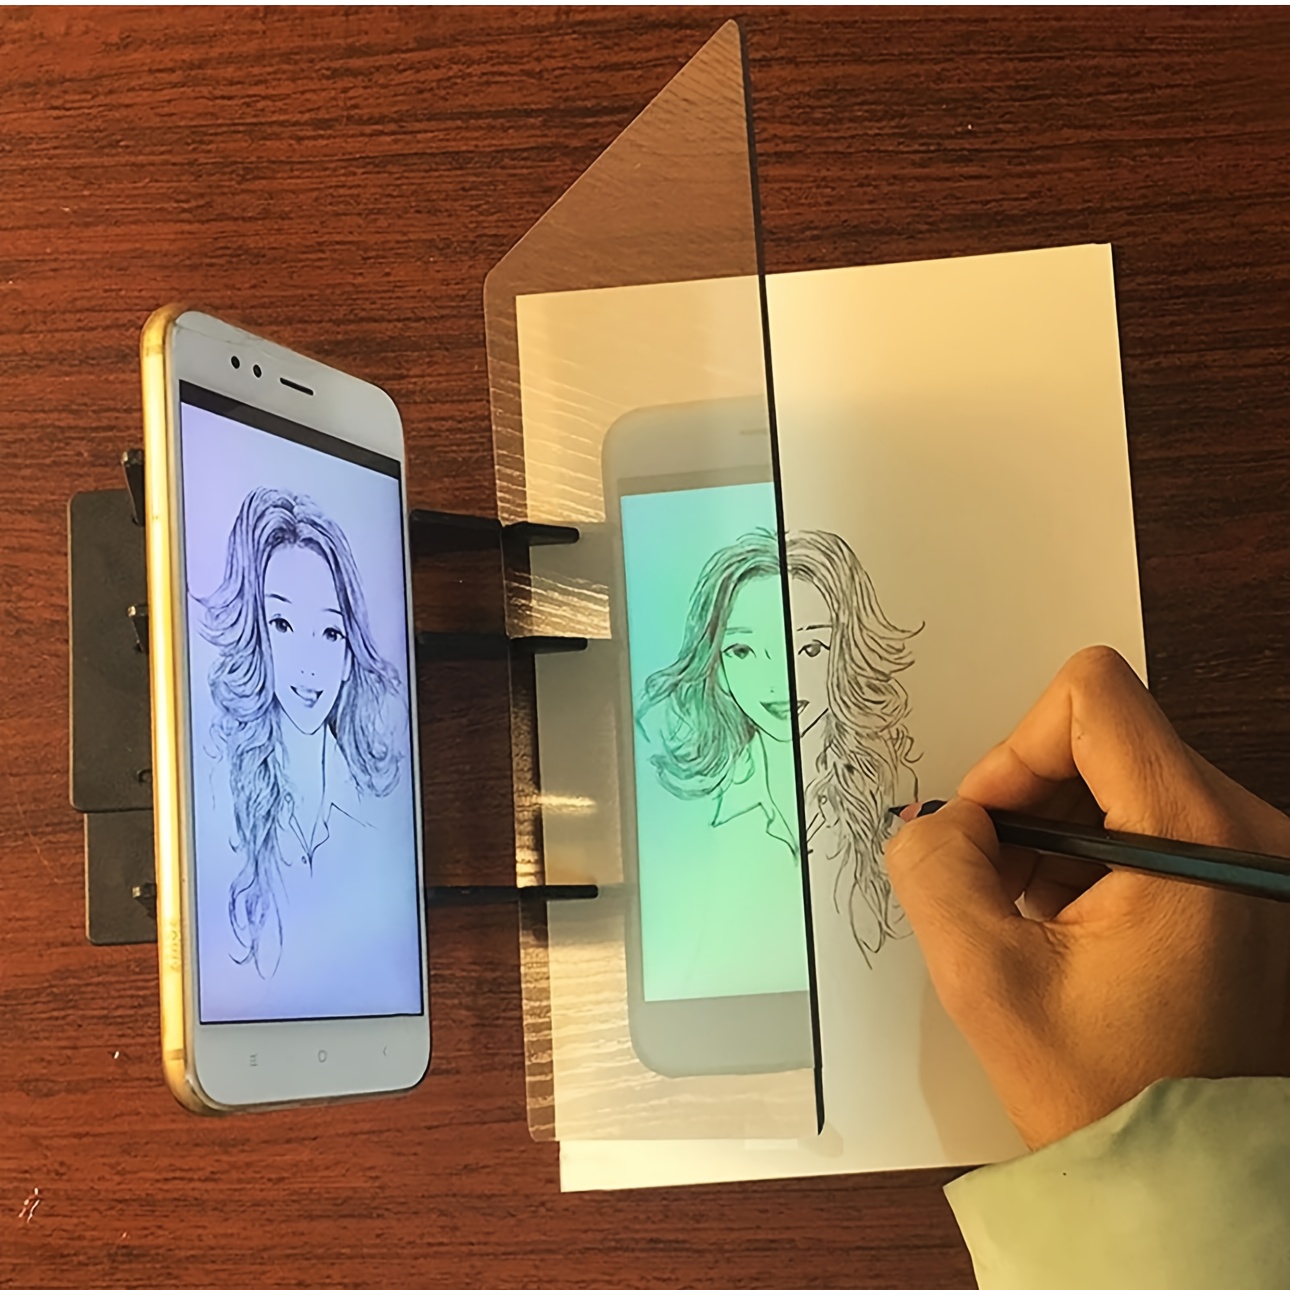 Easy To Paint Sketch Assistant Painting Stand Optical Drawing Projector  Painting Tracing Board Optical Image Drawing Board Sketch Reflection  Dimming Bracket Painting Mirror Plate